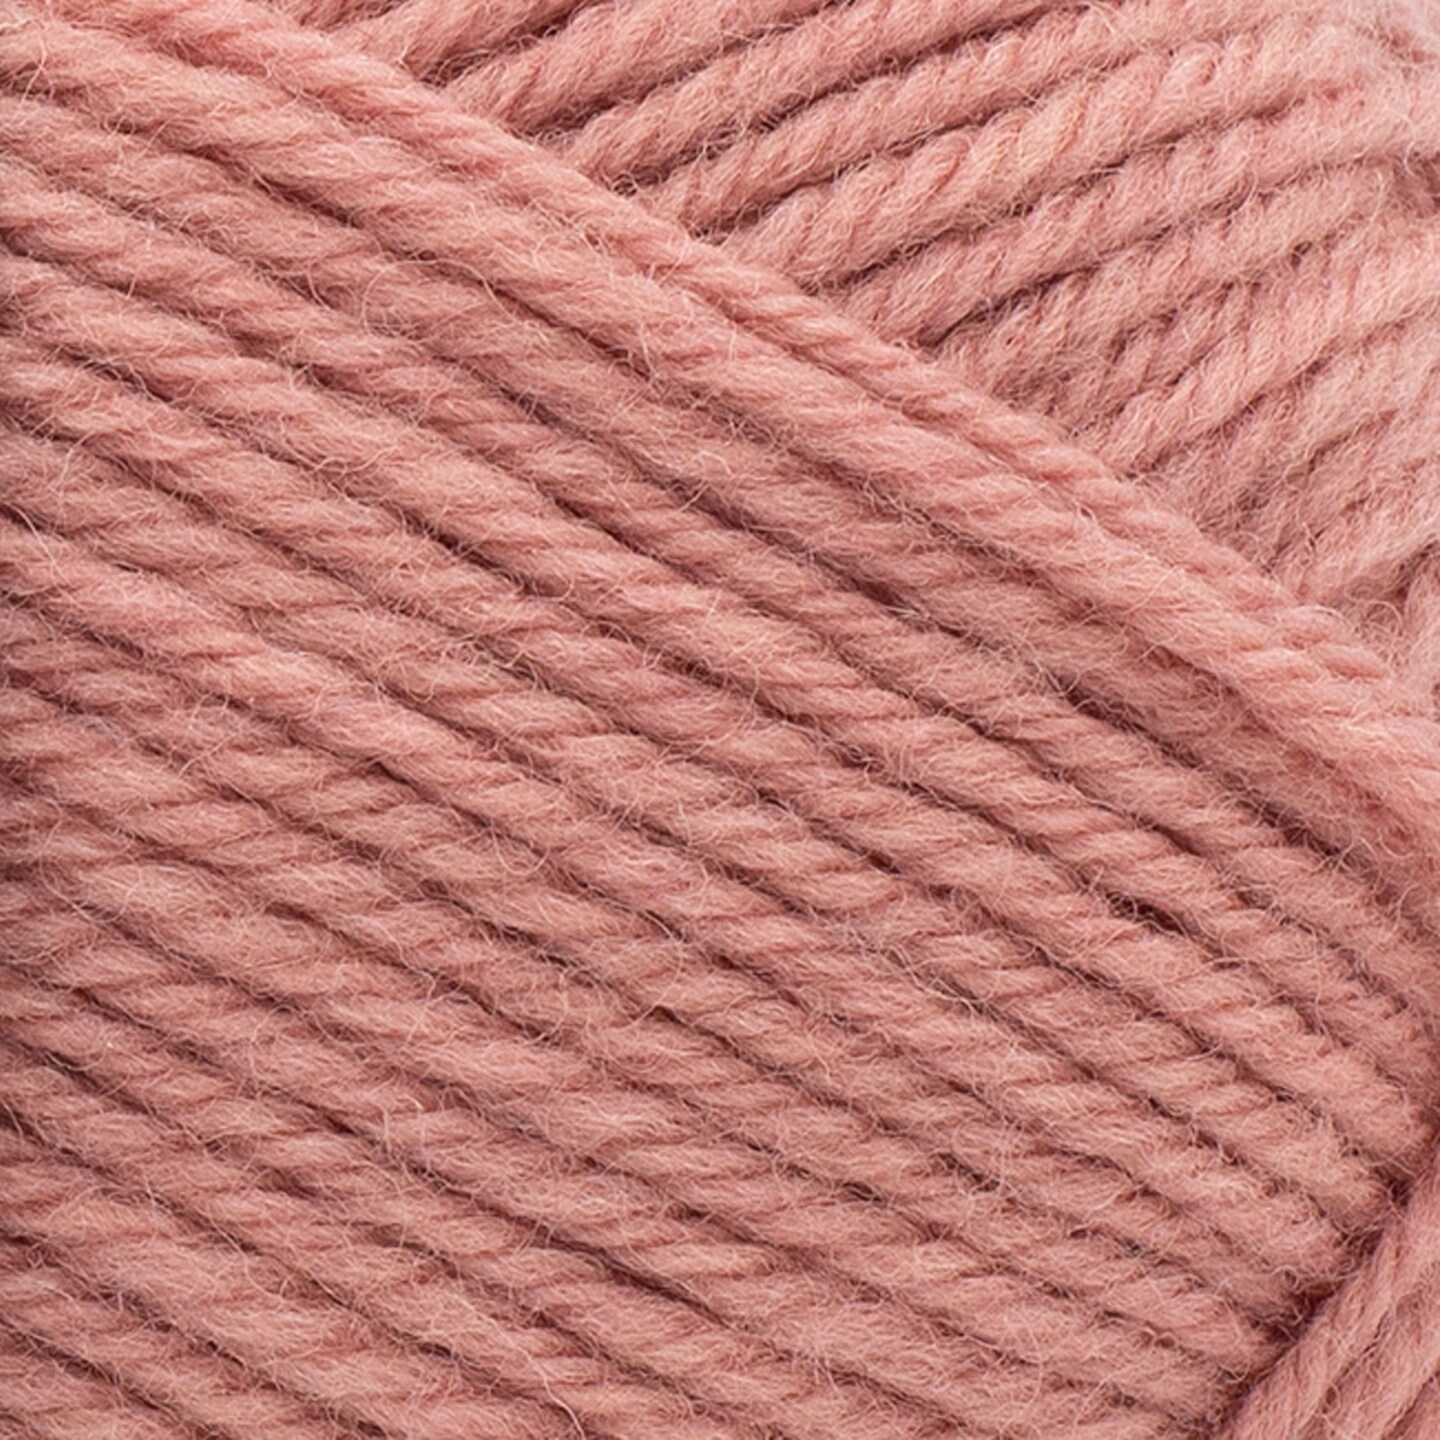 What is this new yarn from Lion Brand all about? Local Grown Yarn Review 